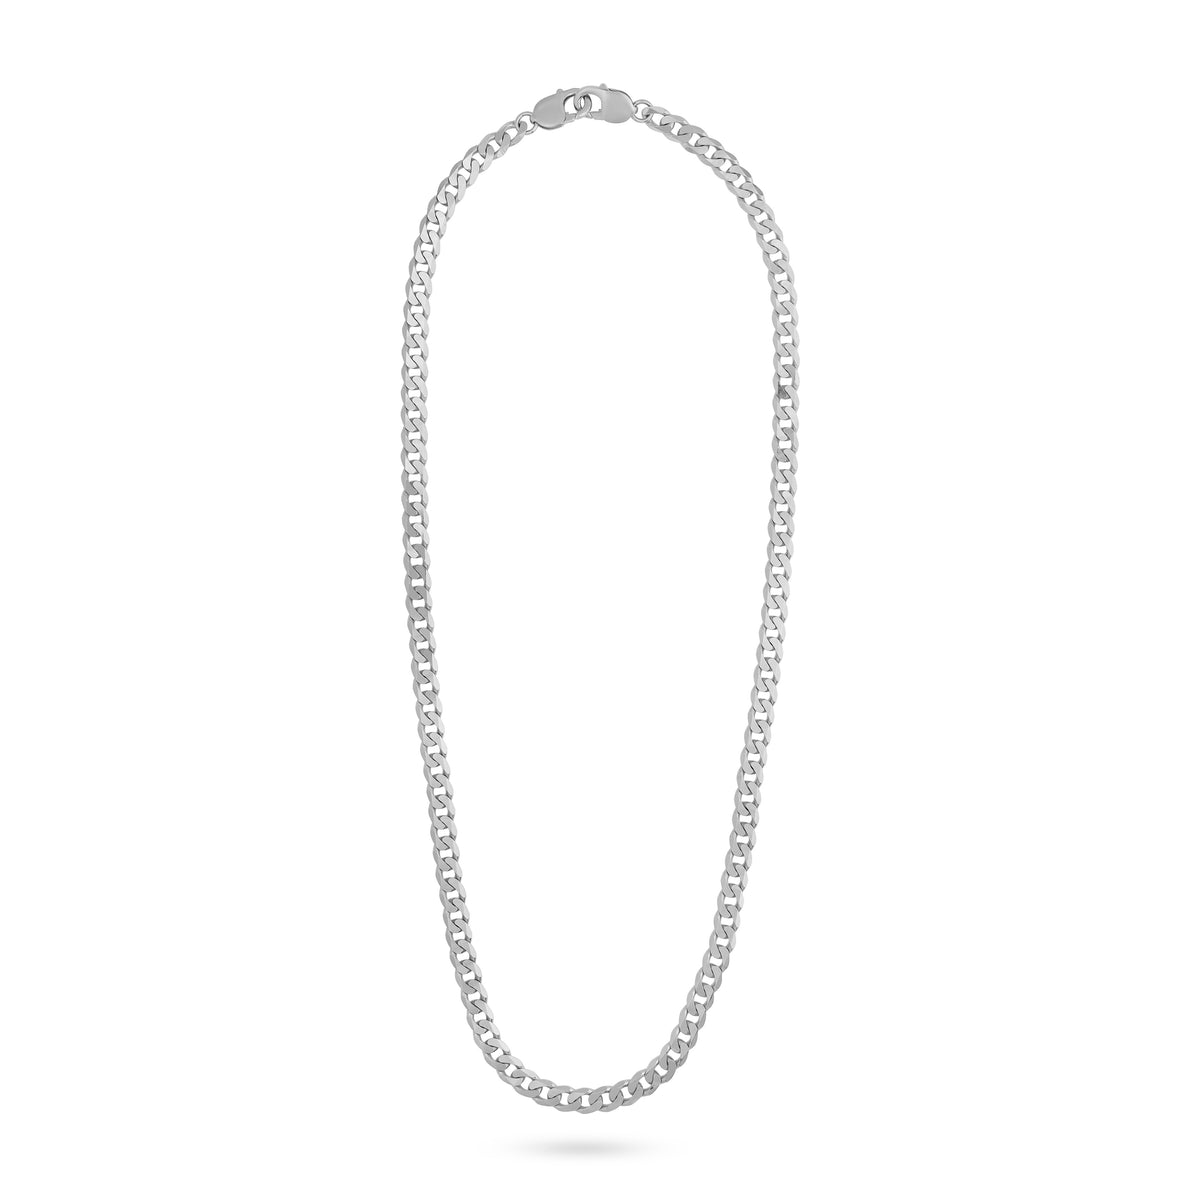 VIKA jewels self love collection wide chain necklace recycled sterling silver silber handmade bali sustainable ethical nachhaltig schmuck kette fusskette ankle anklet